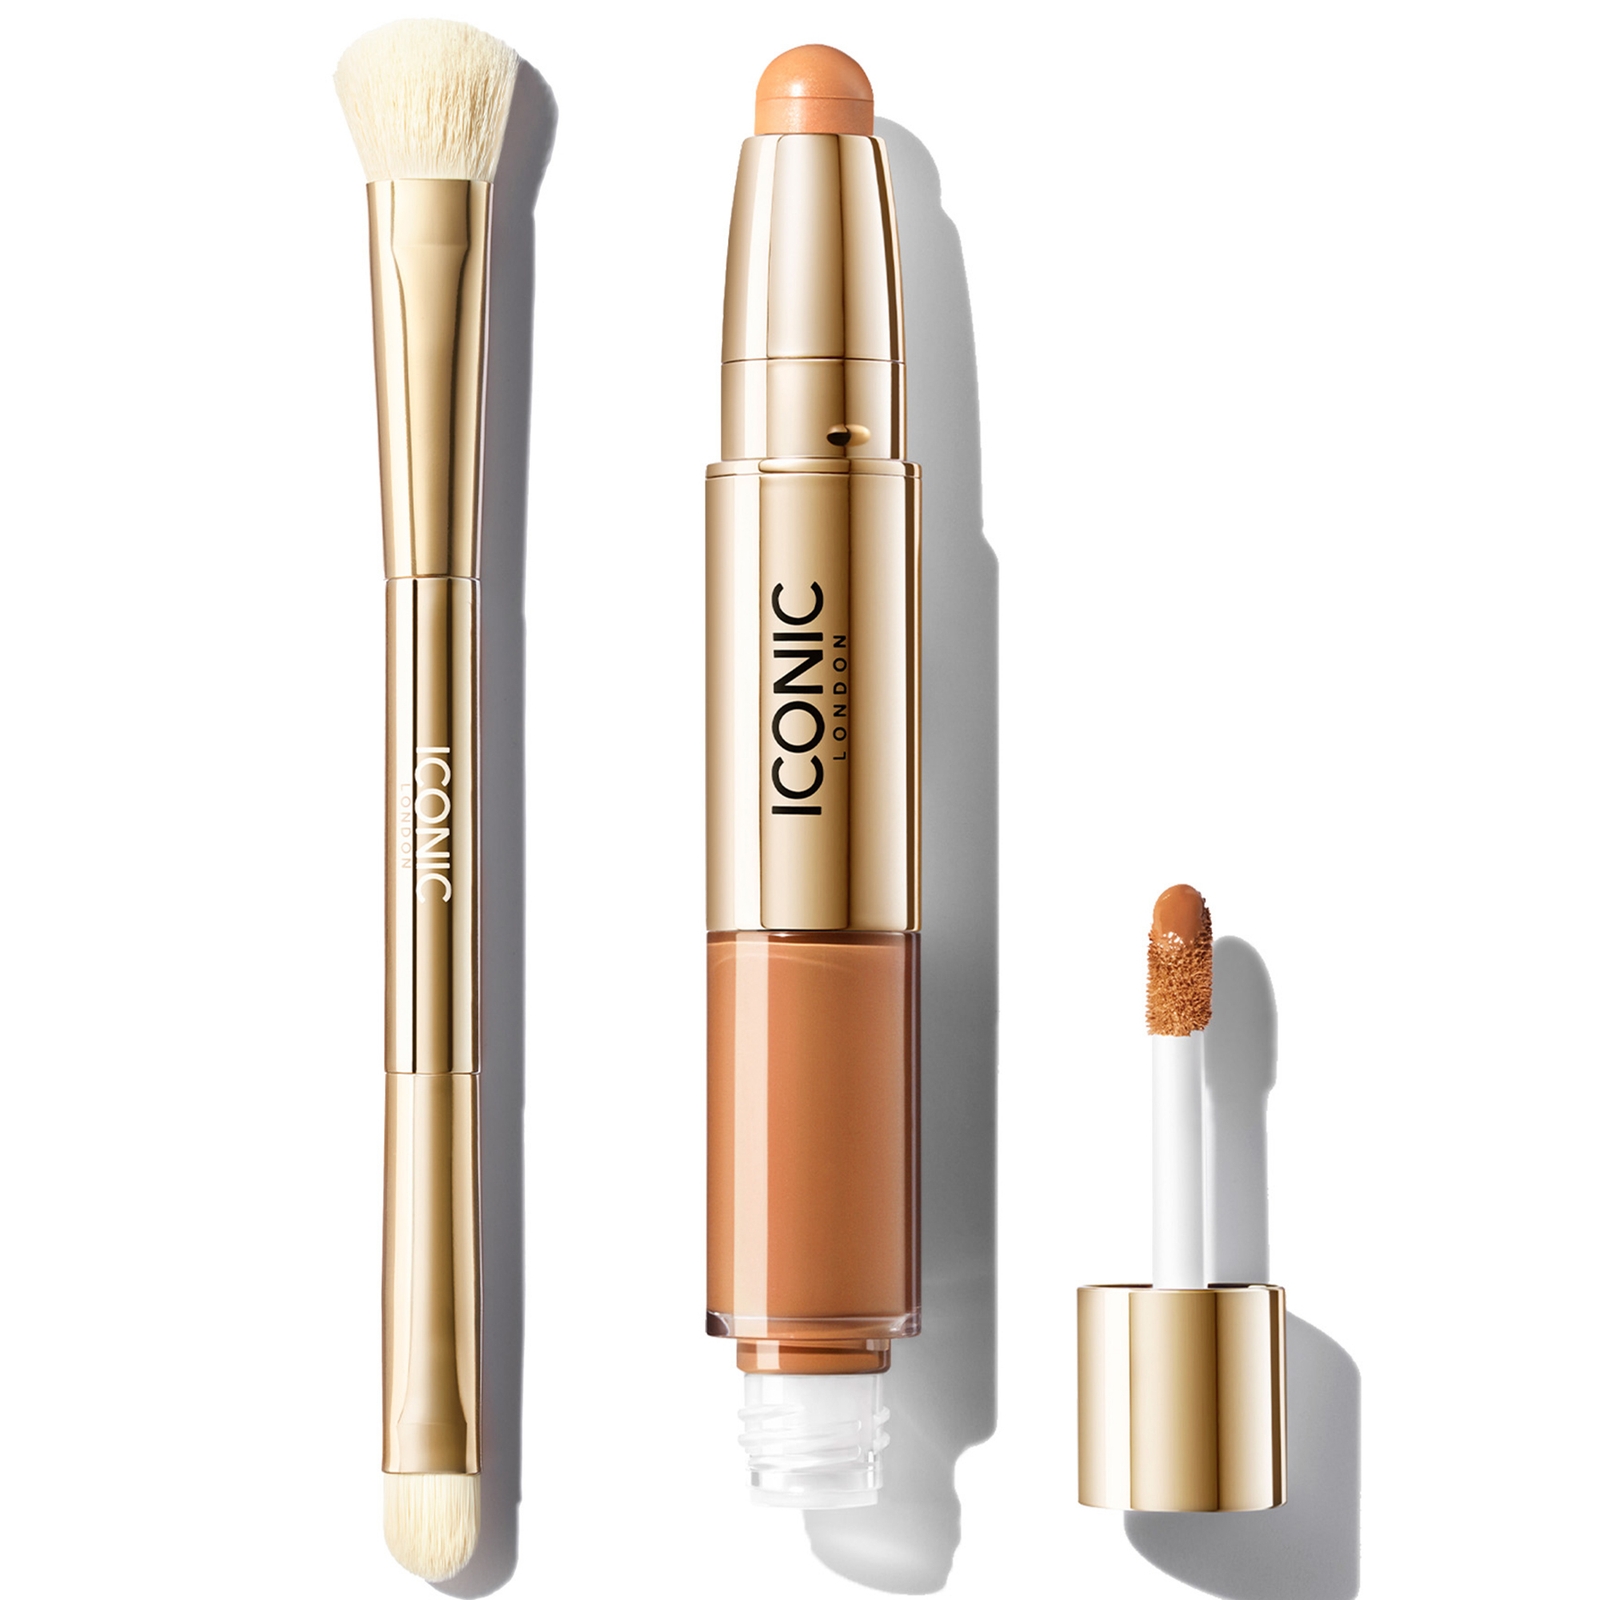 Iconic London Radiant Concealer And Brush Bundle (various Shades) - Warm Tan